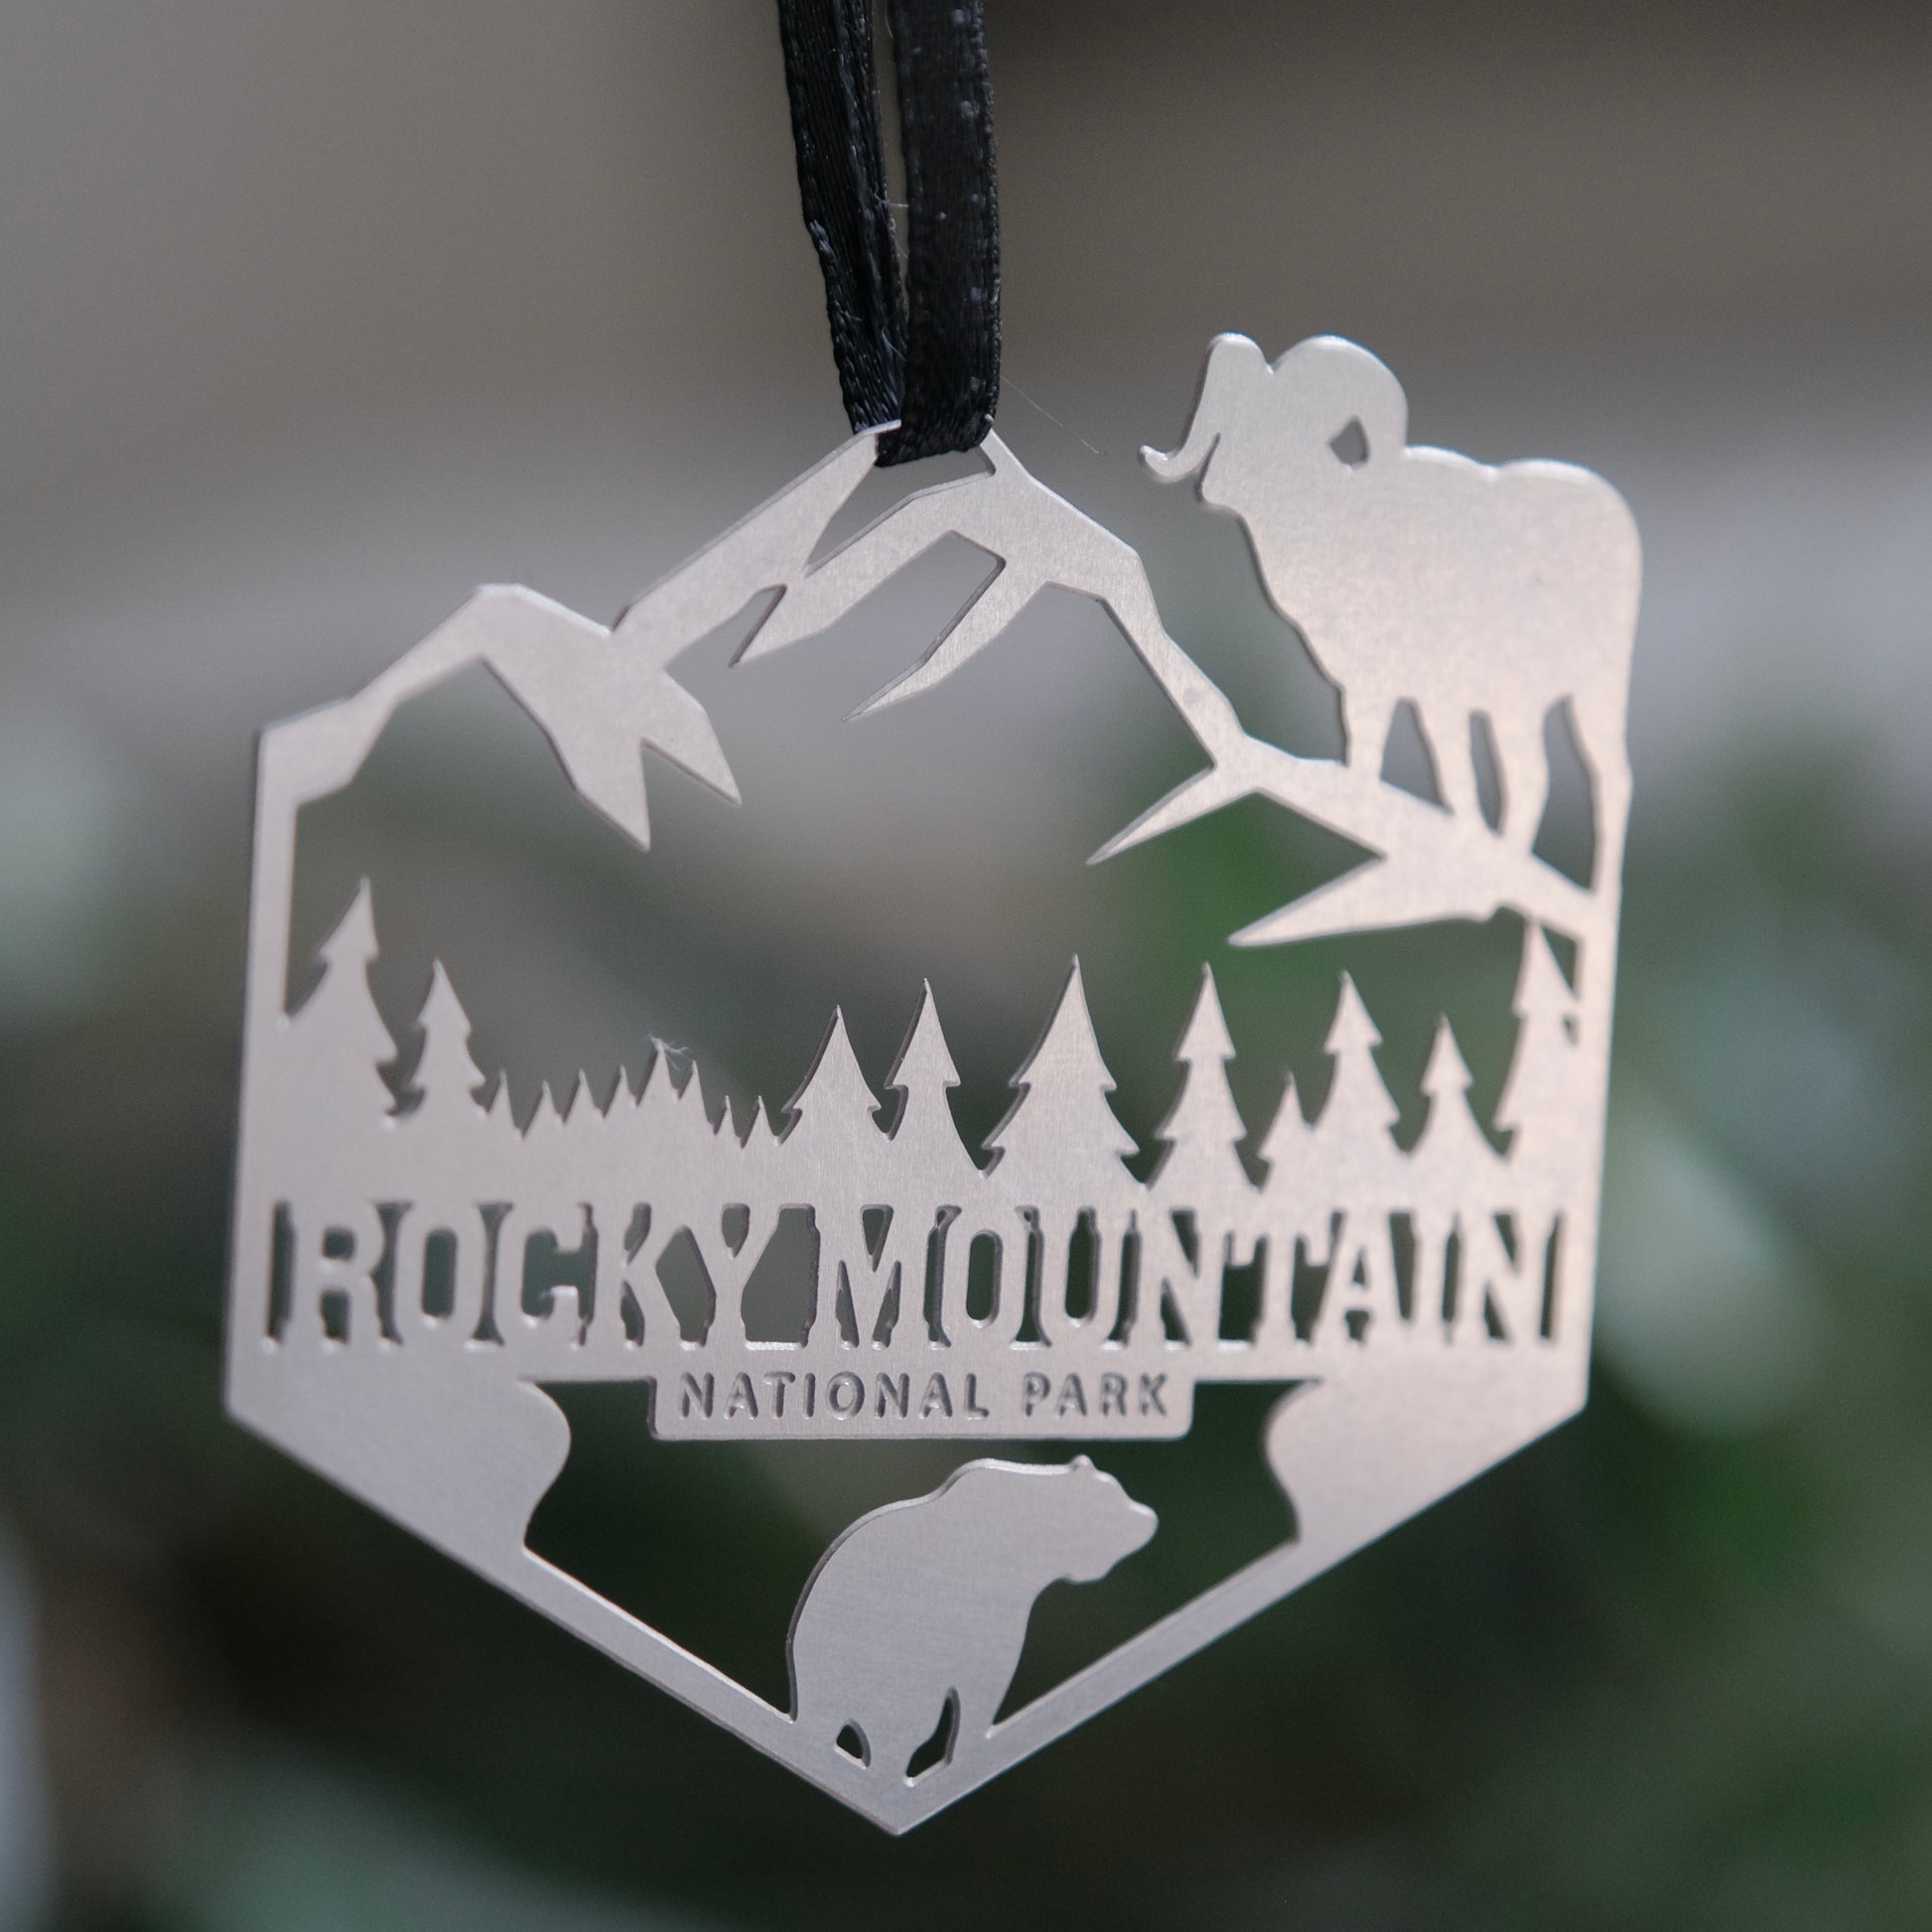 National Park Gift - Rocky Mountain National Park Ornament